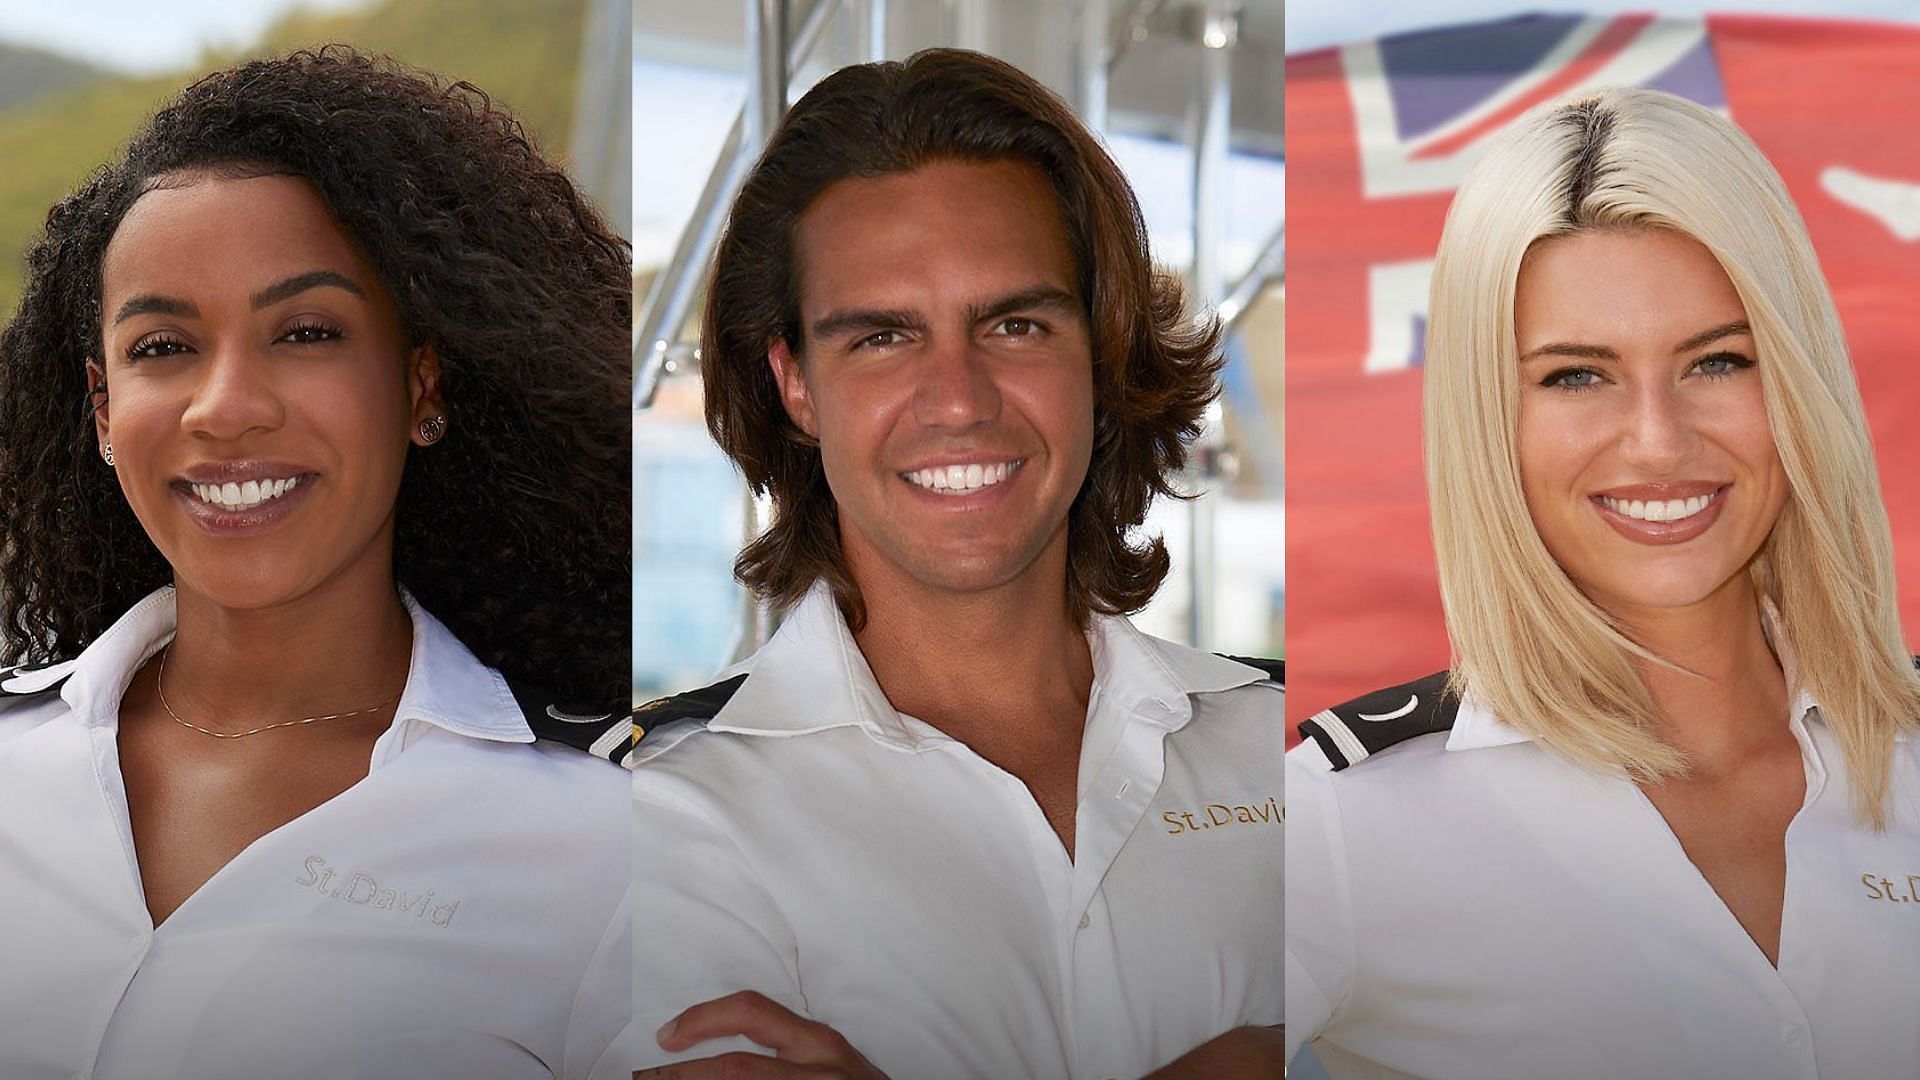 Alissa Humber, Ben Willoughby, and Camille Lamb from Below Deck